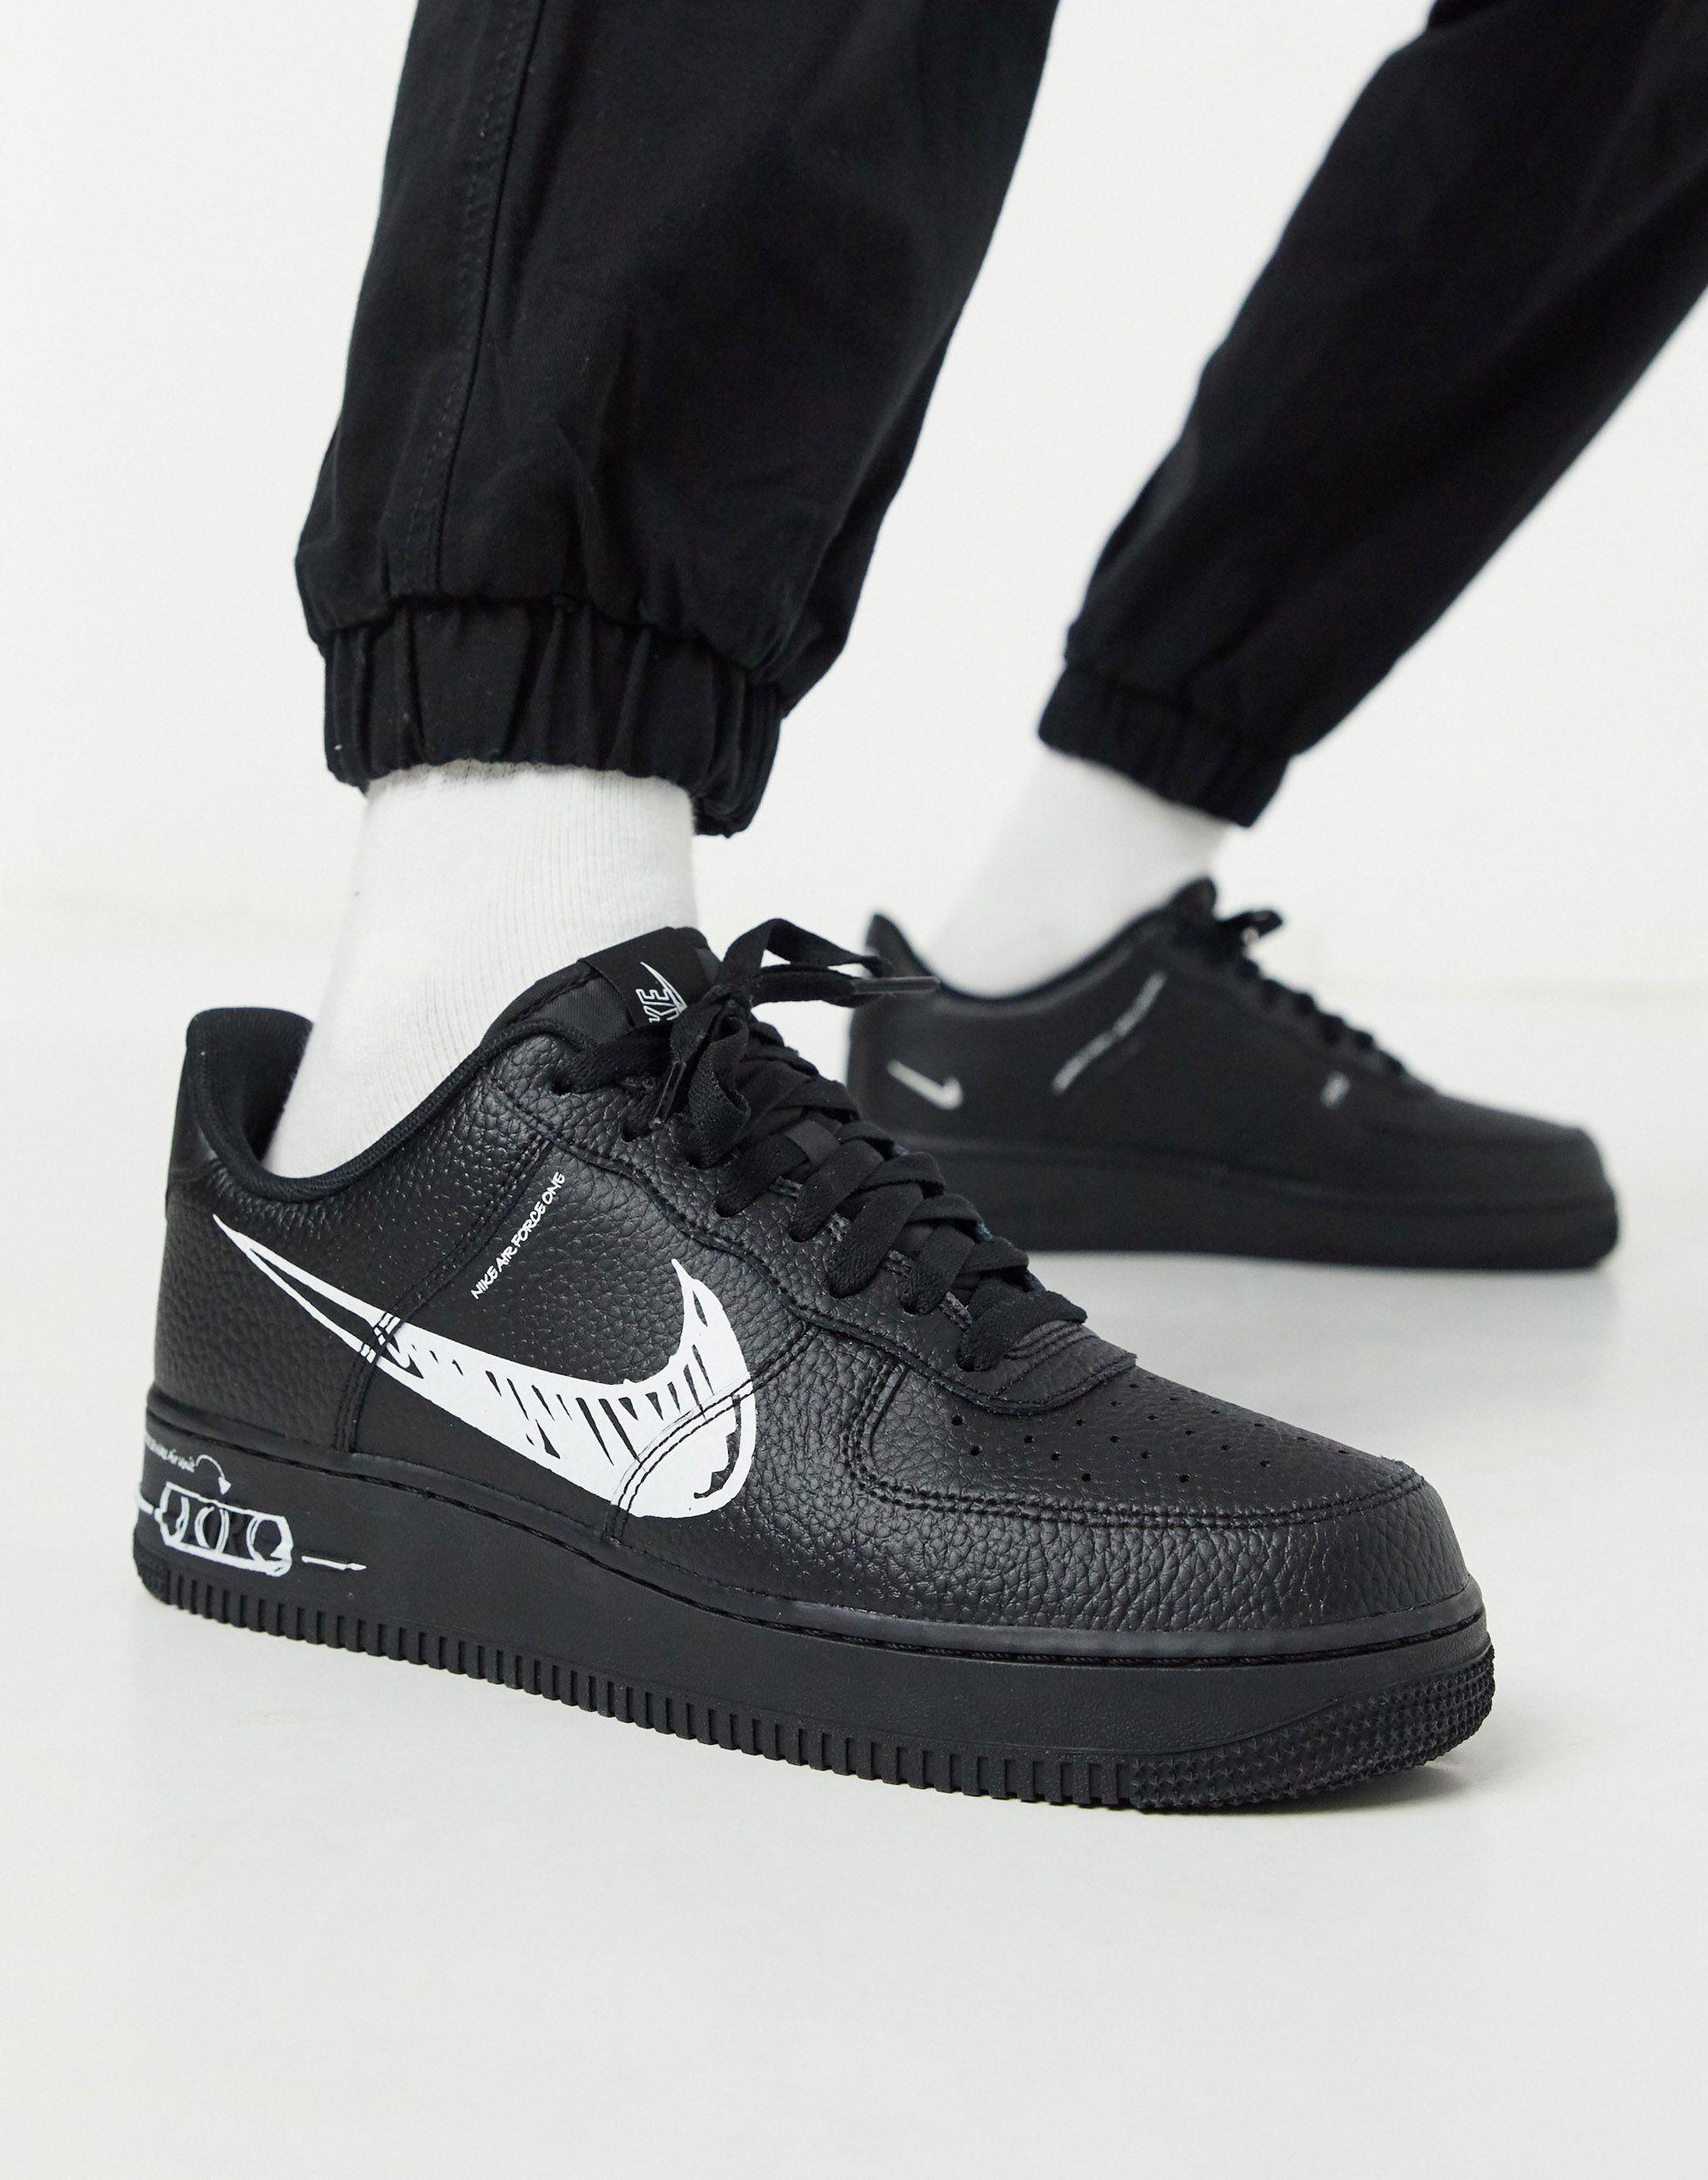 Nike Air Force 1 Lv8 Utility Sl Trainers in Black for Men - Lyst